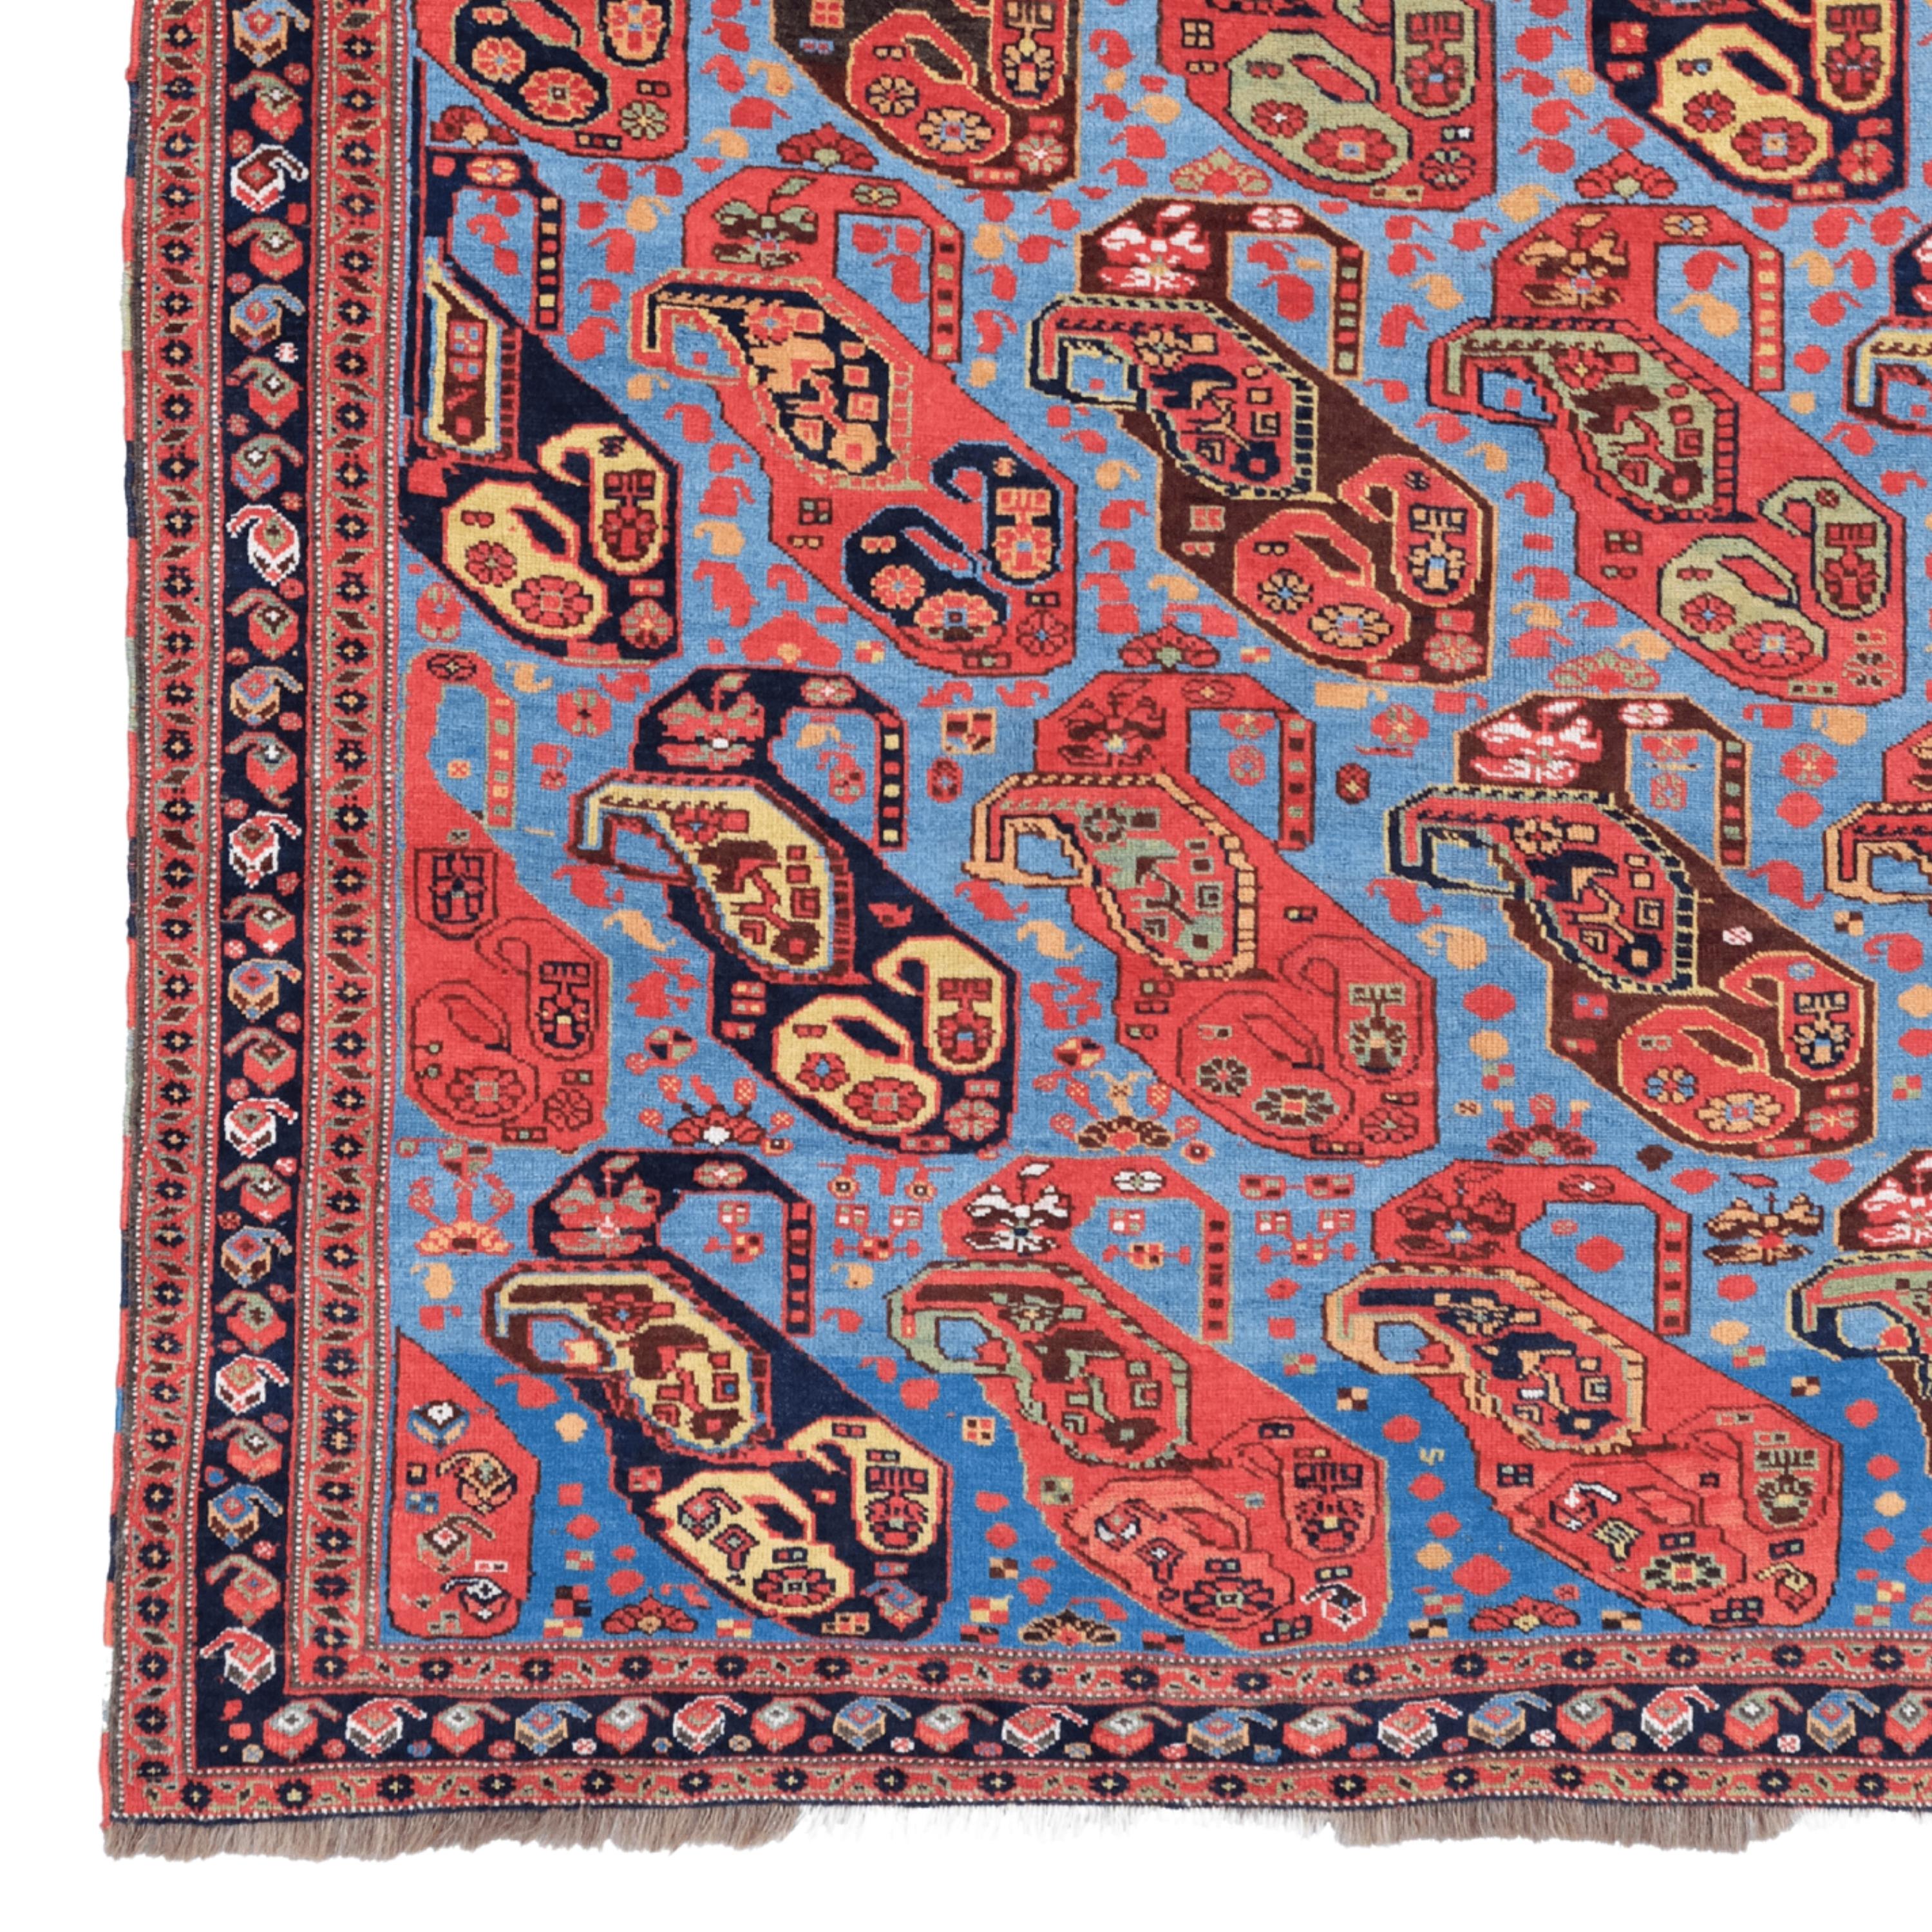 Antique Khamseh Rug
An antique Khamseh tribal rug the rare and intriguing, mother and child Boteh design. All good dyes.
Rugs with this design woven in this format are quite scarce, most are much bigger and of longer proportions. This example is in